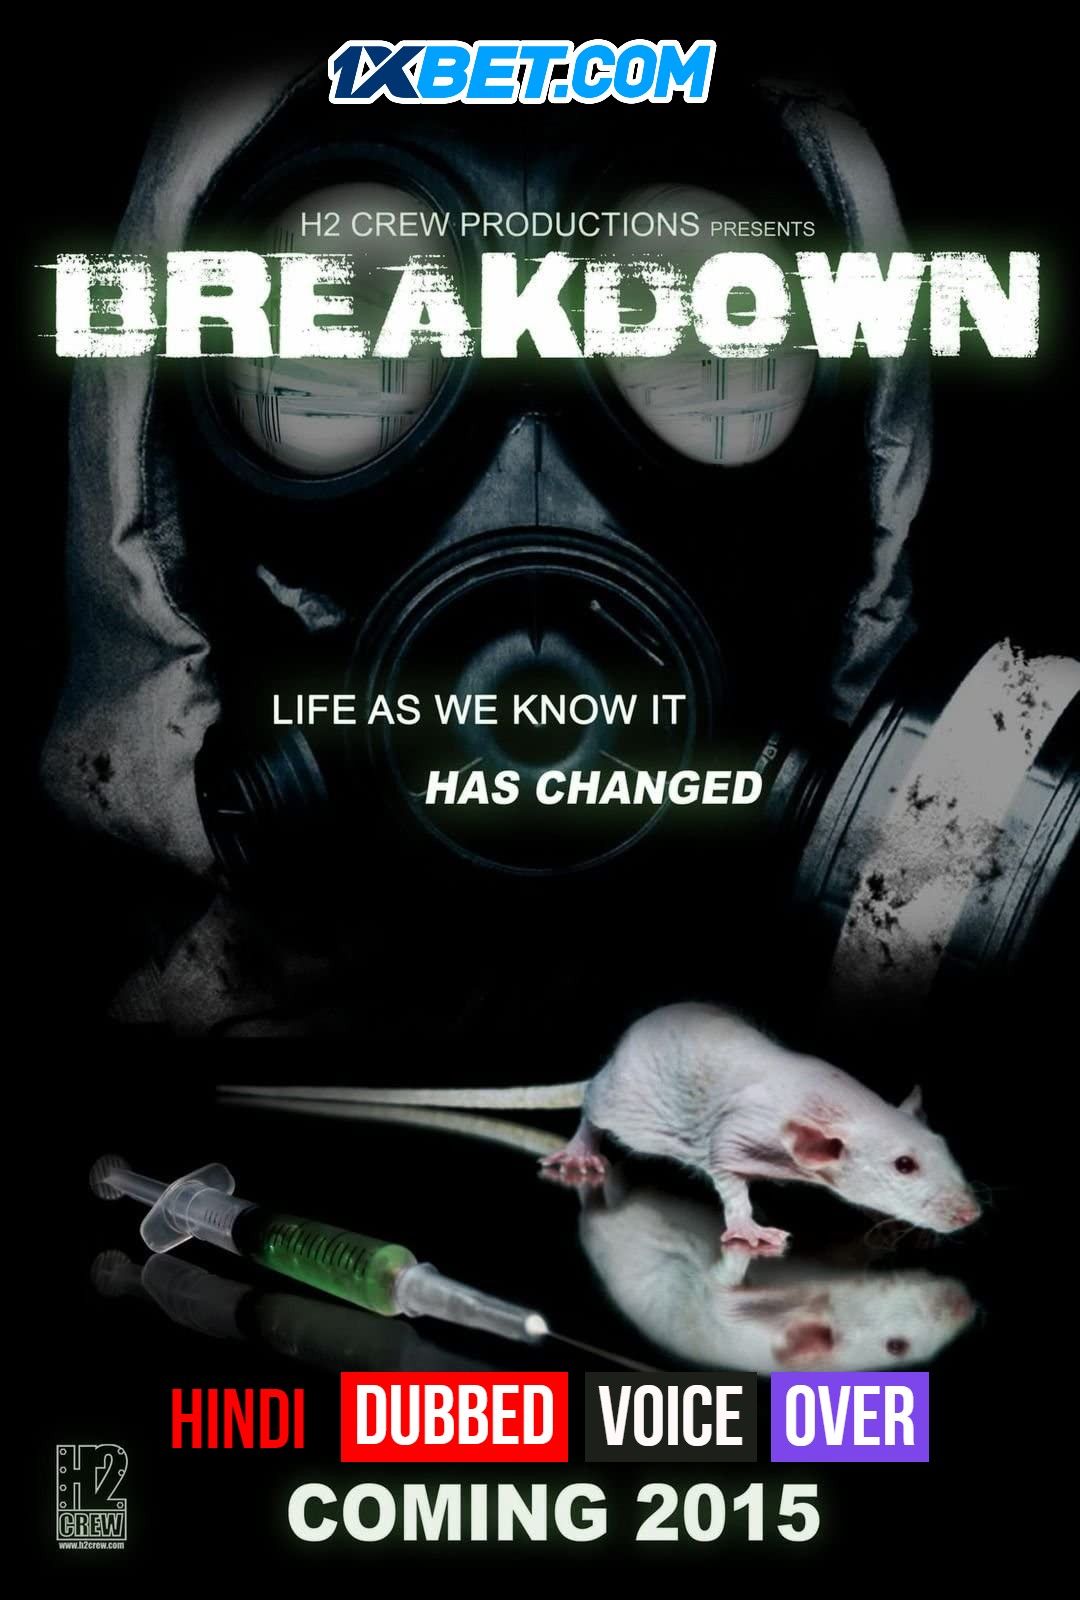 Breakdown (2020) Hindi (Voice Over) Dubbed WEBRip download full movie